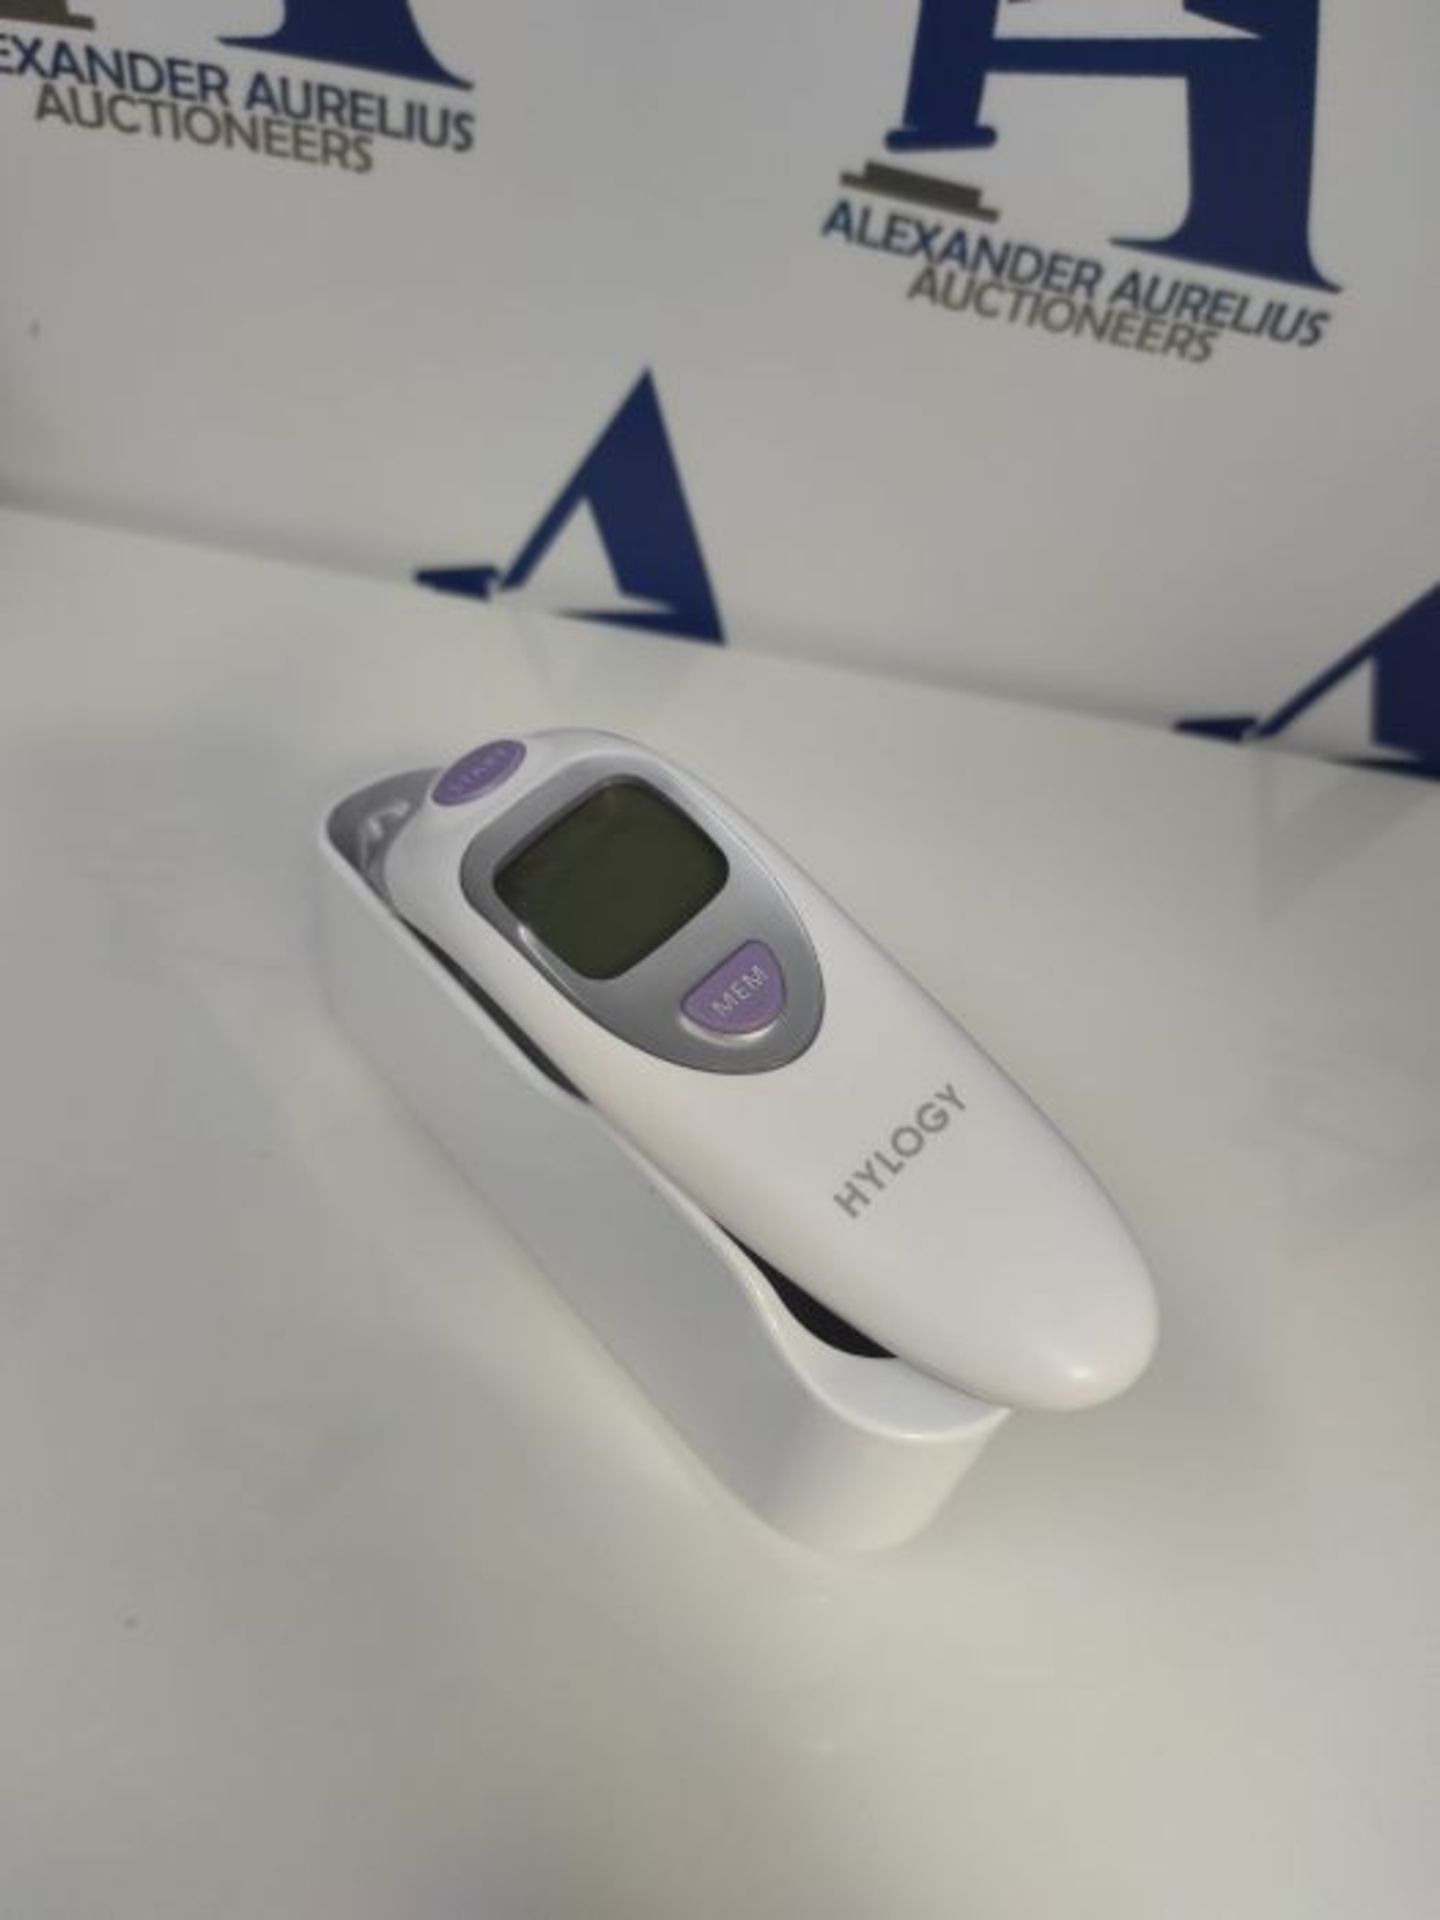 Braun ThermoScan 7 Ohrthermometer - Image 3 of 3